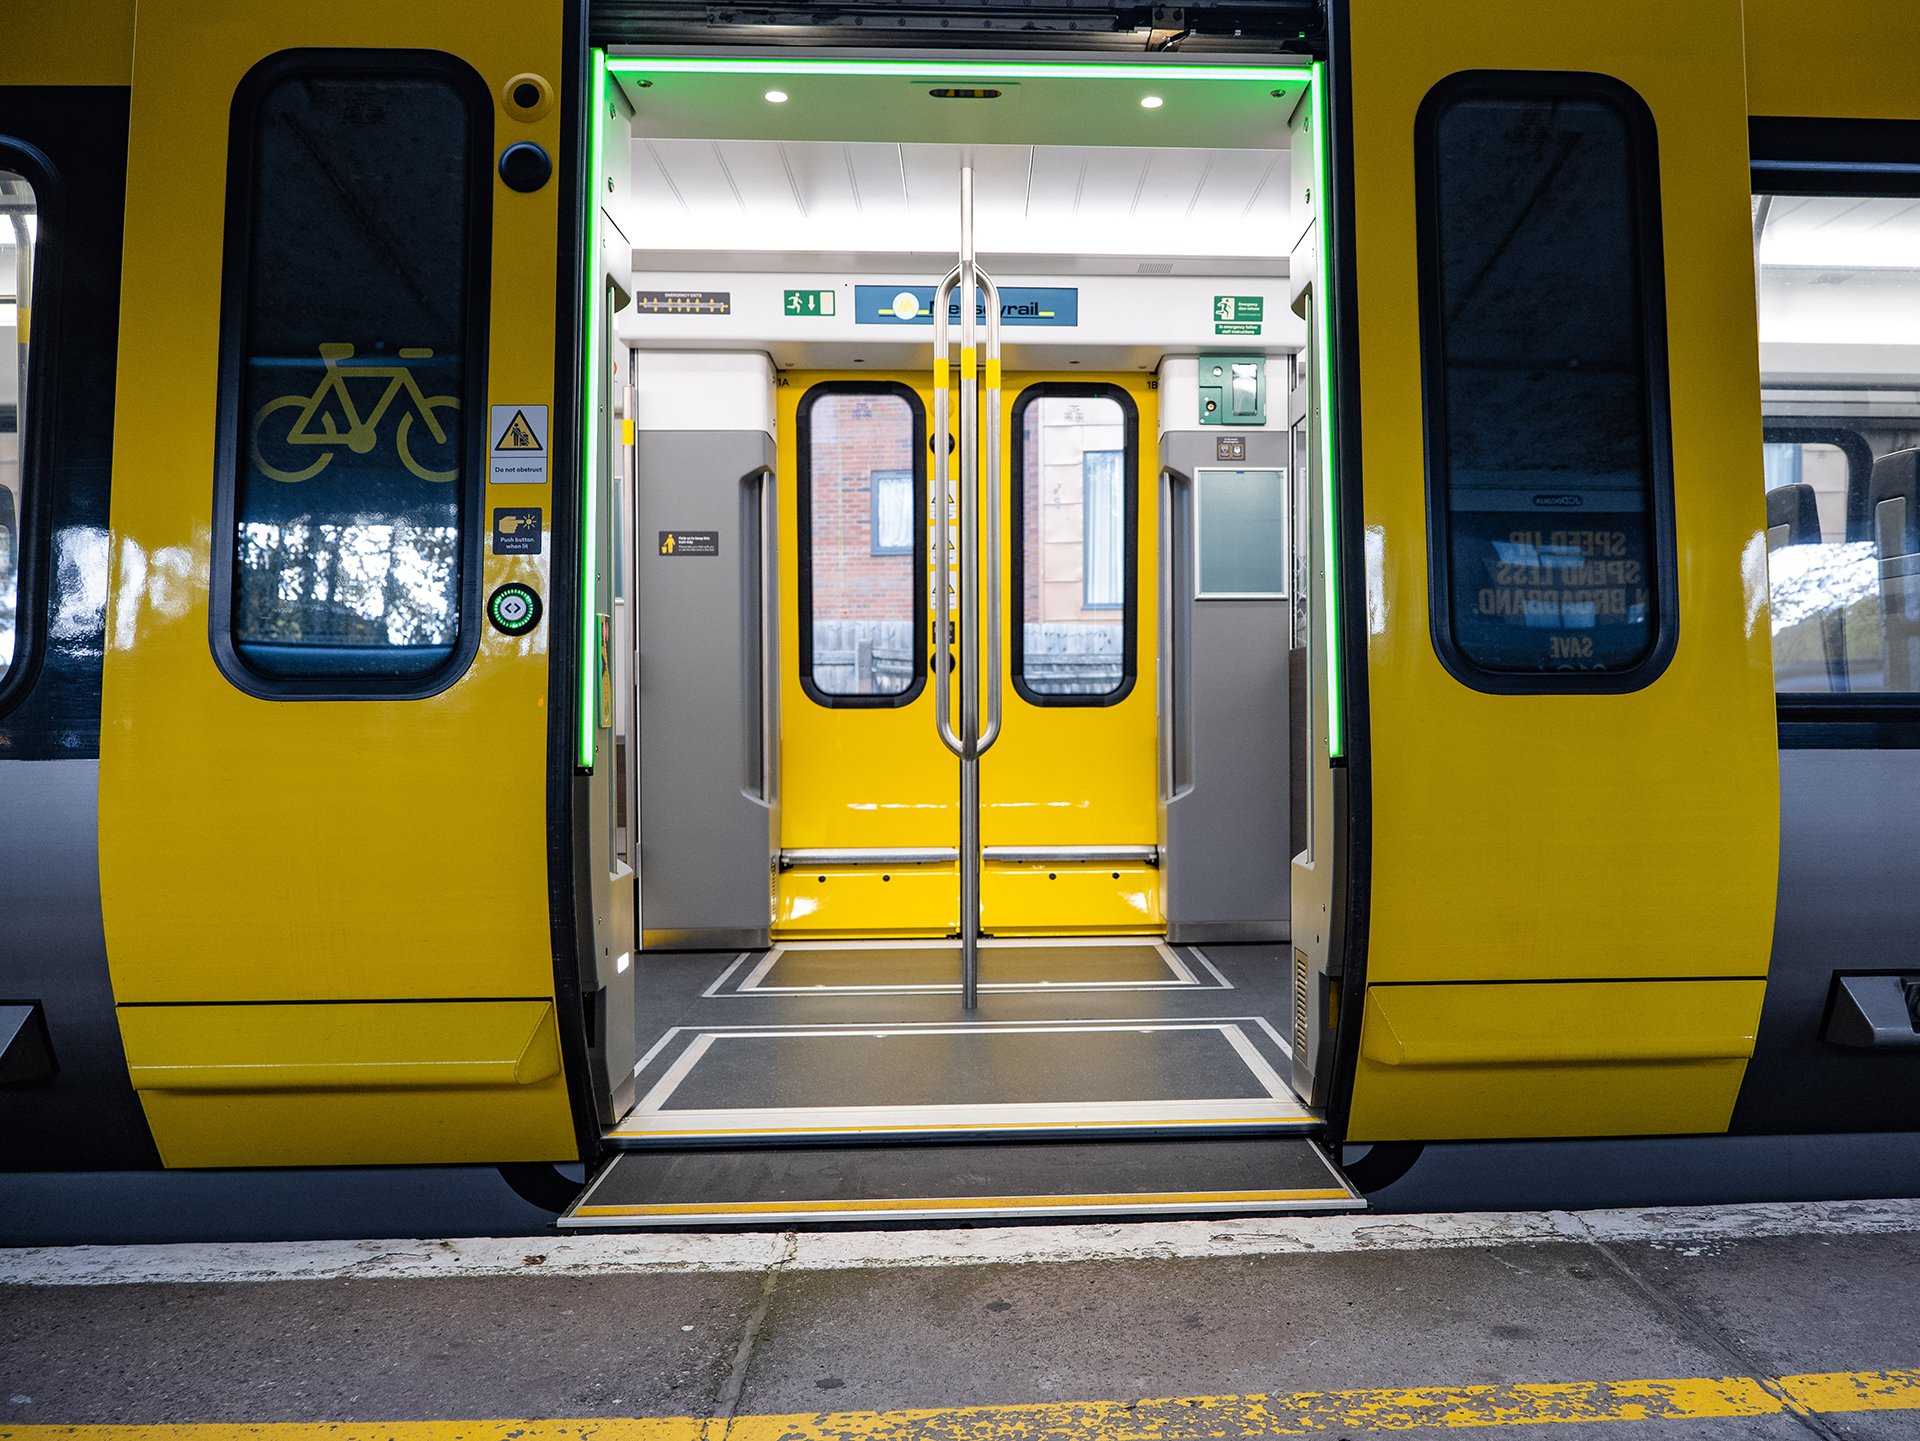 The open doors of a 777 train at station platform